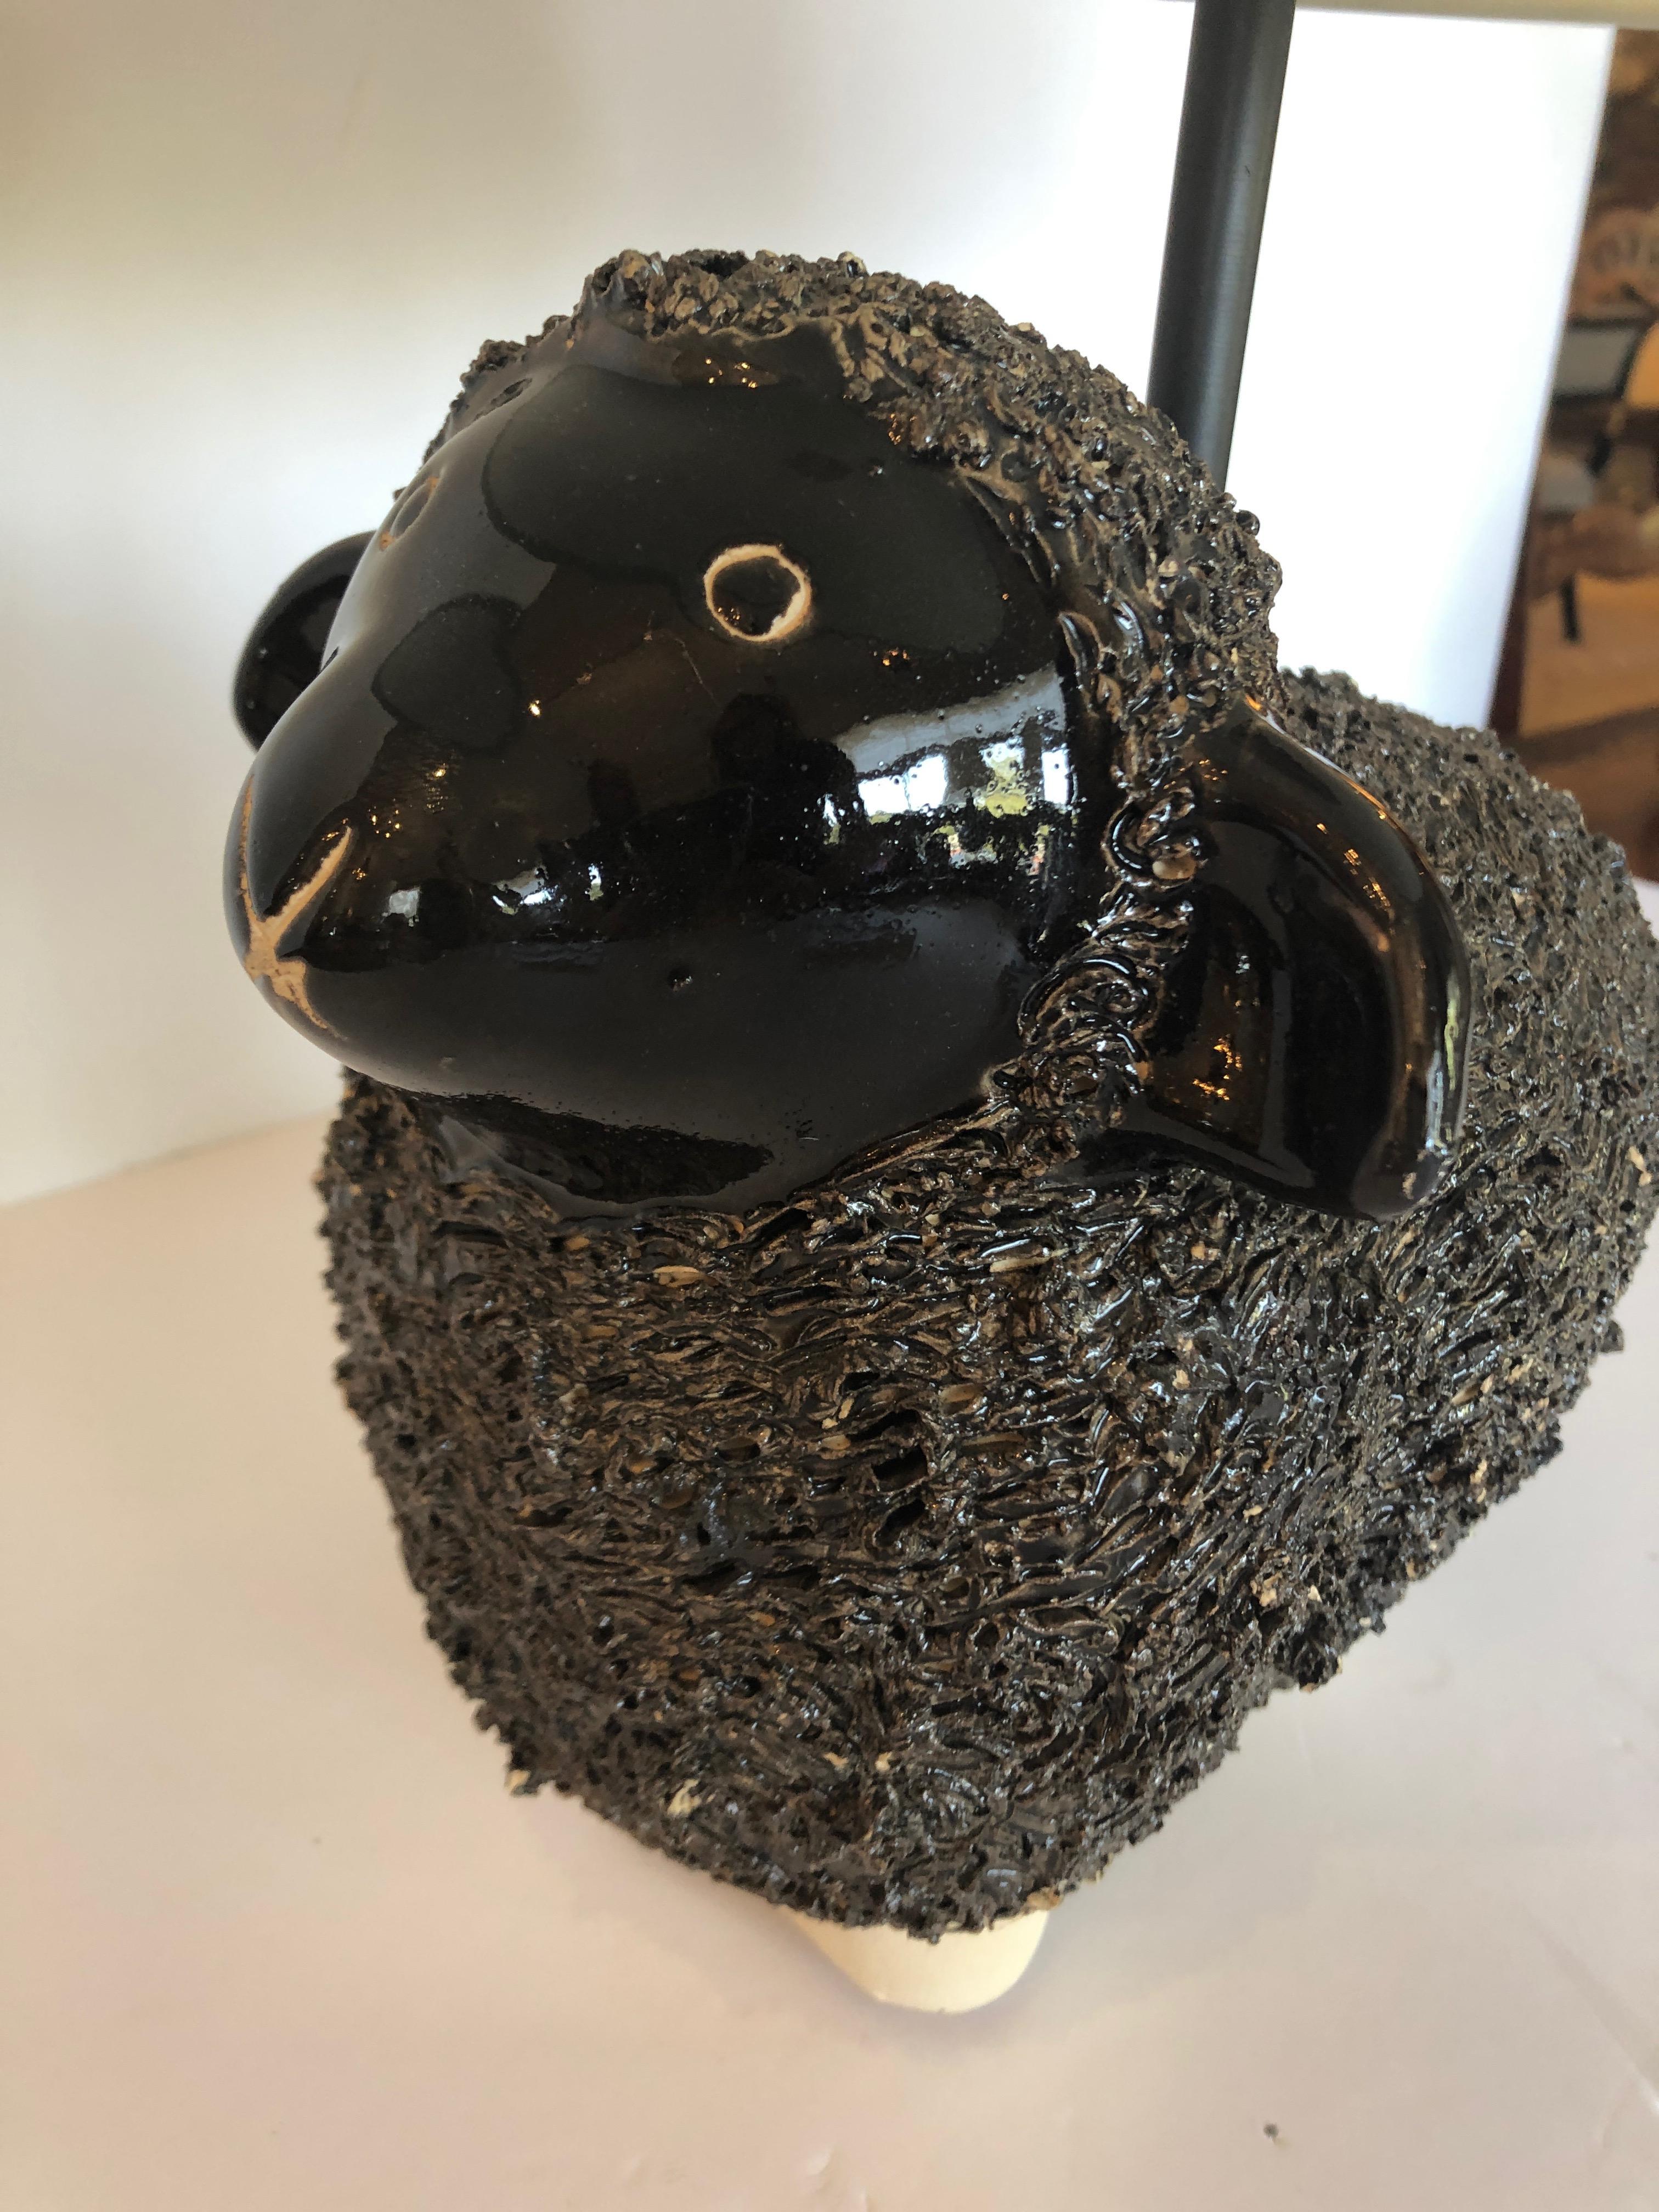 Adorable Handmade Black Ceramic Sheep Lamp In Excellent Condition For Sale In Hopewell, NJ